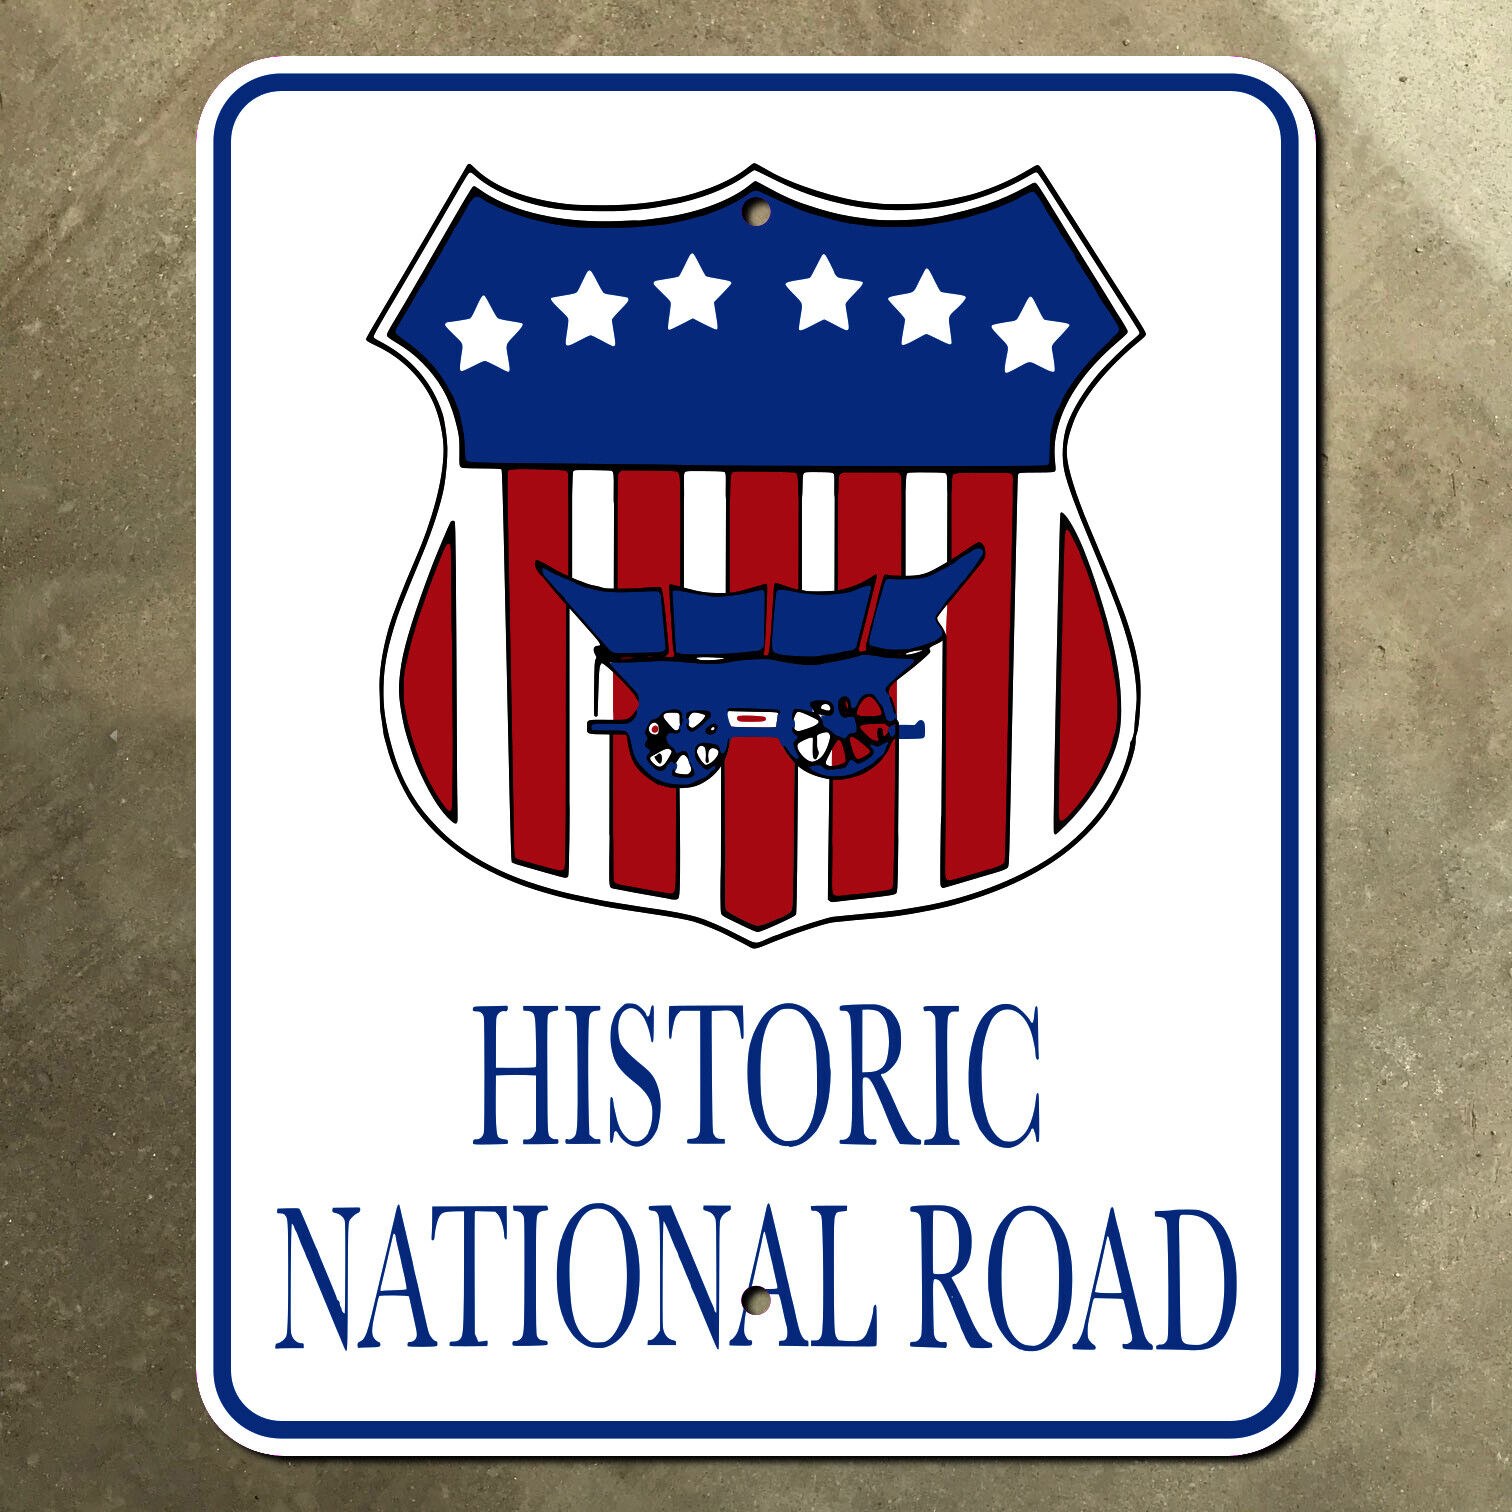 Illinois Historic National Road highway sign US route 40 Conestoga 10x12